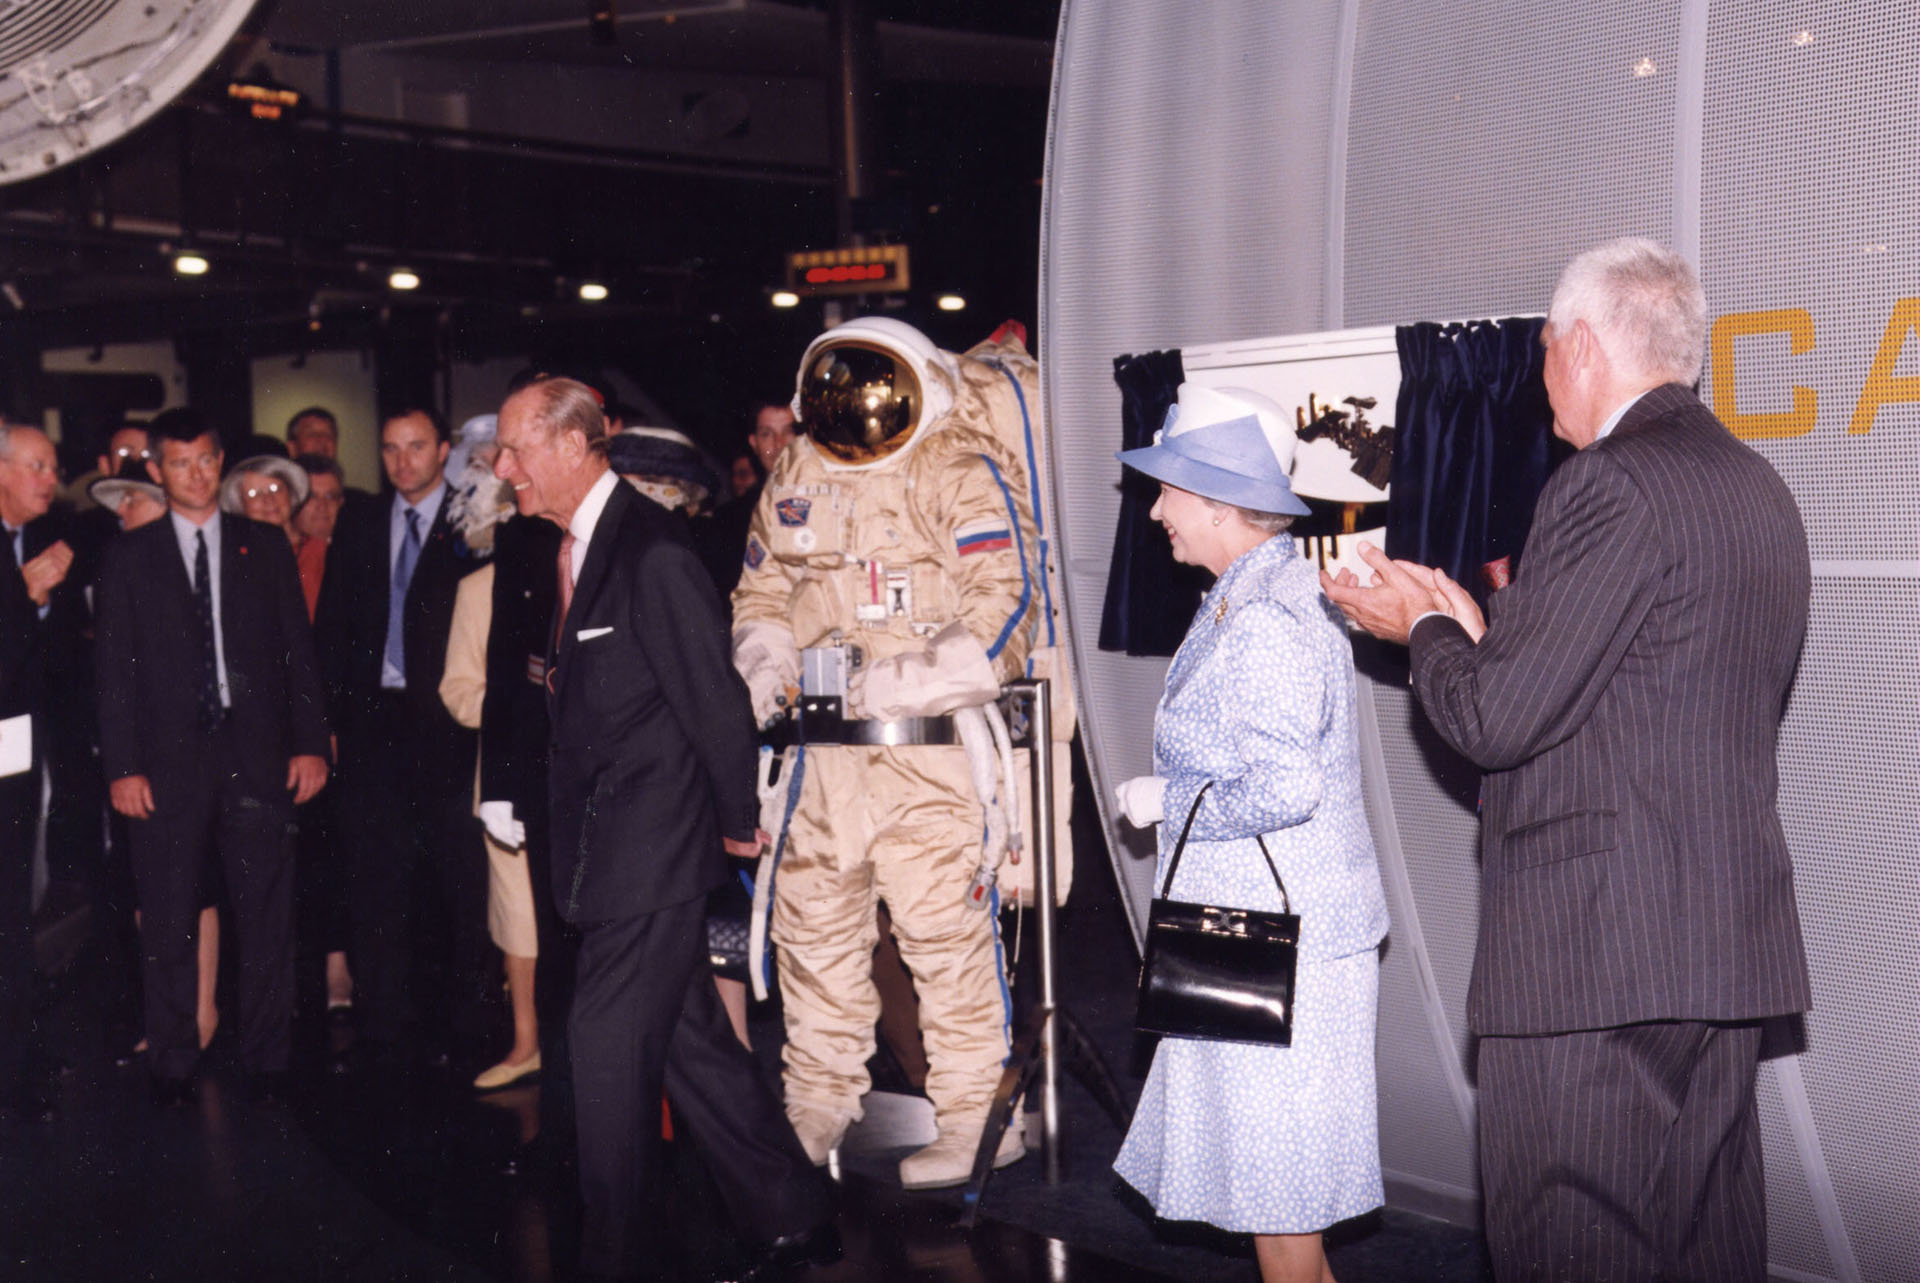 The Queen and Prince Philip at The National Space Centre, 2002 - Picture Courtesy of The National Space Centre